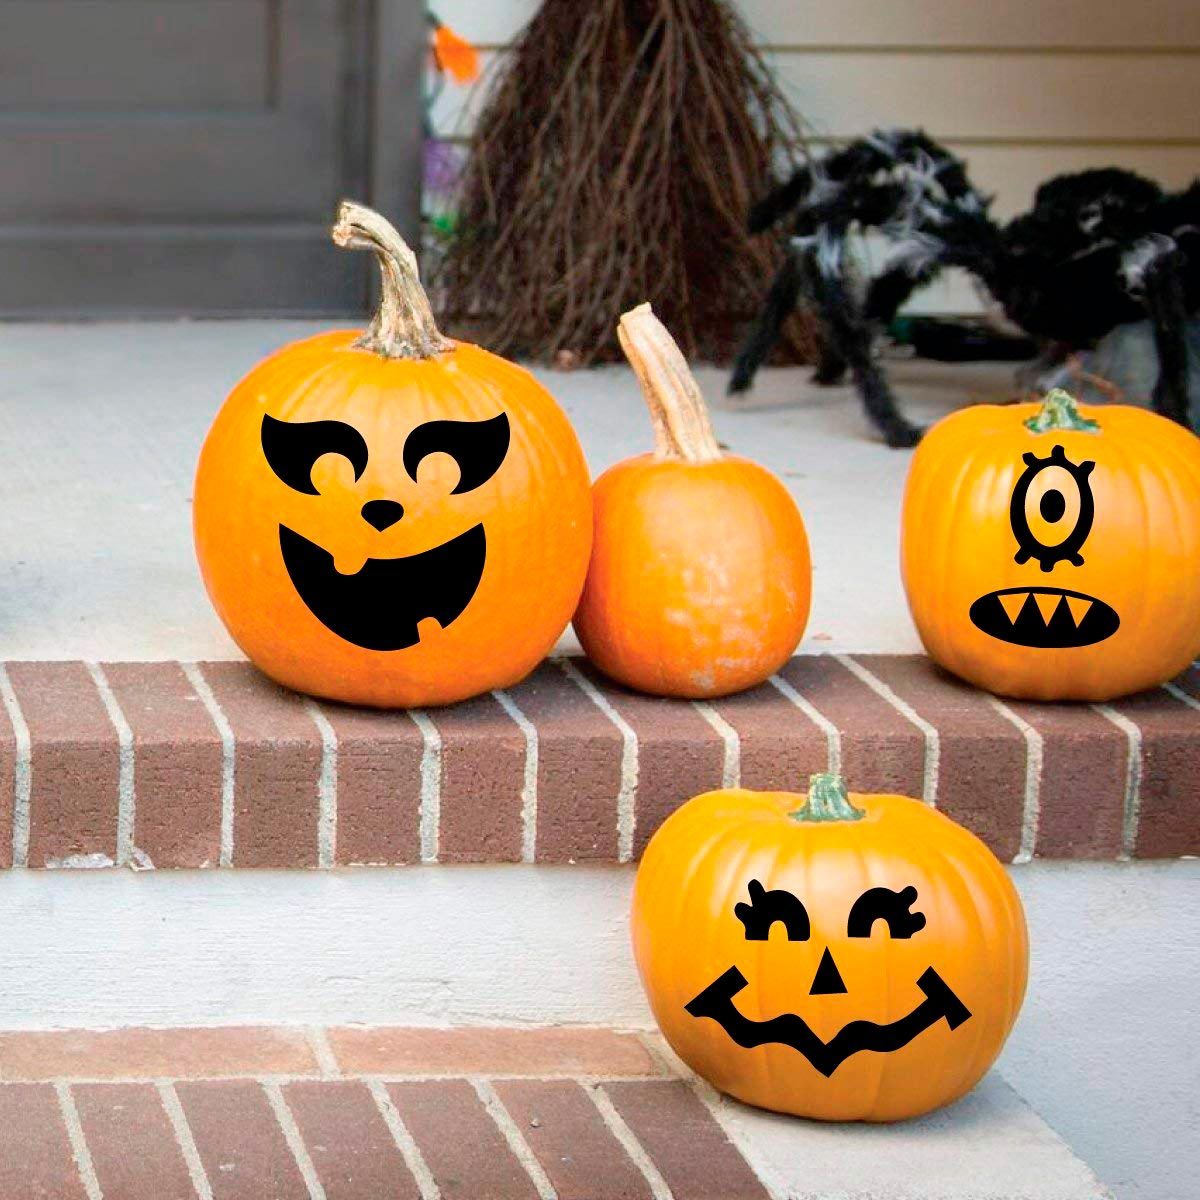 10 Halloween Pumpkin Decorating Kits That Don't Require Carving Tools ...